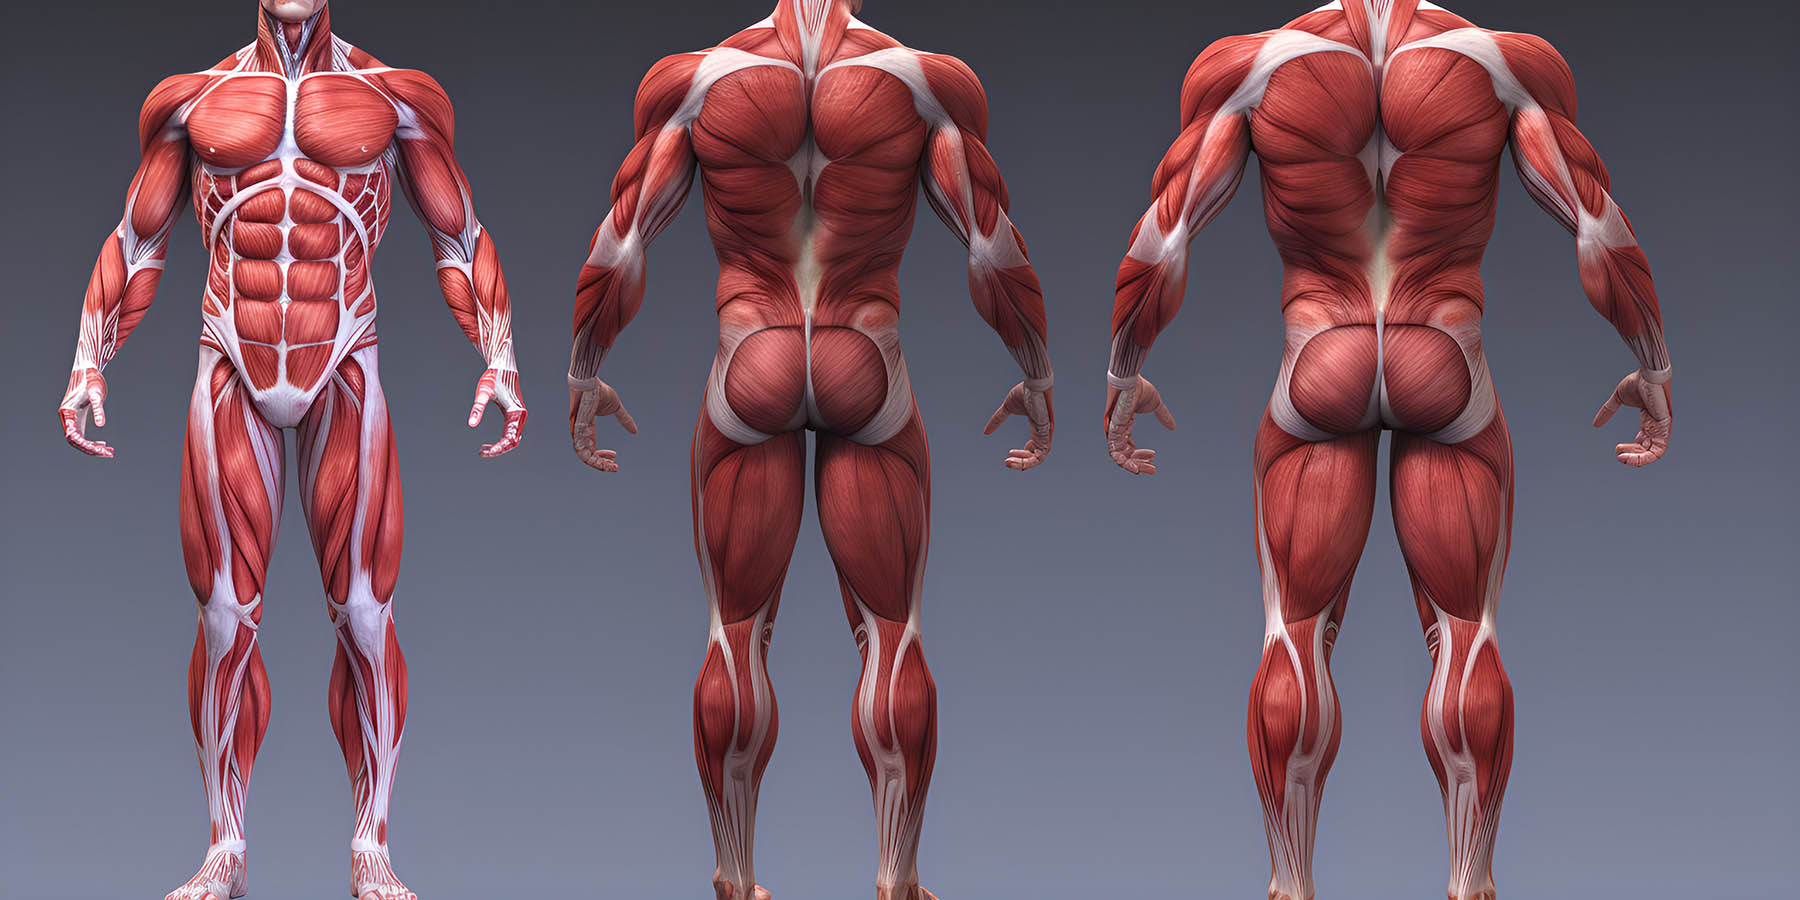 The Science Behind Muscle Hypertrophy